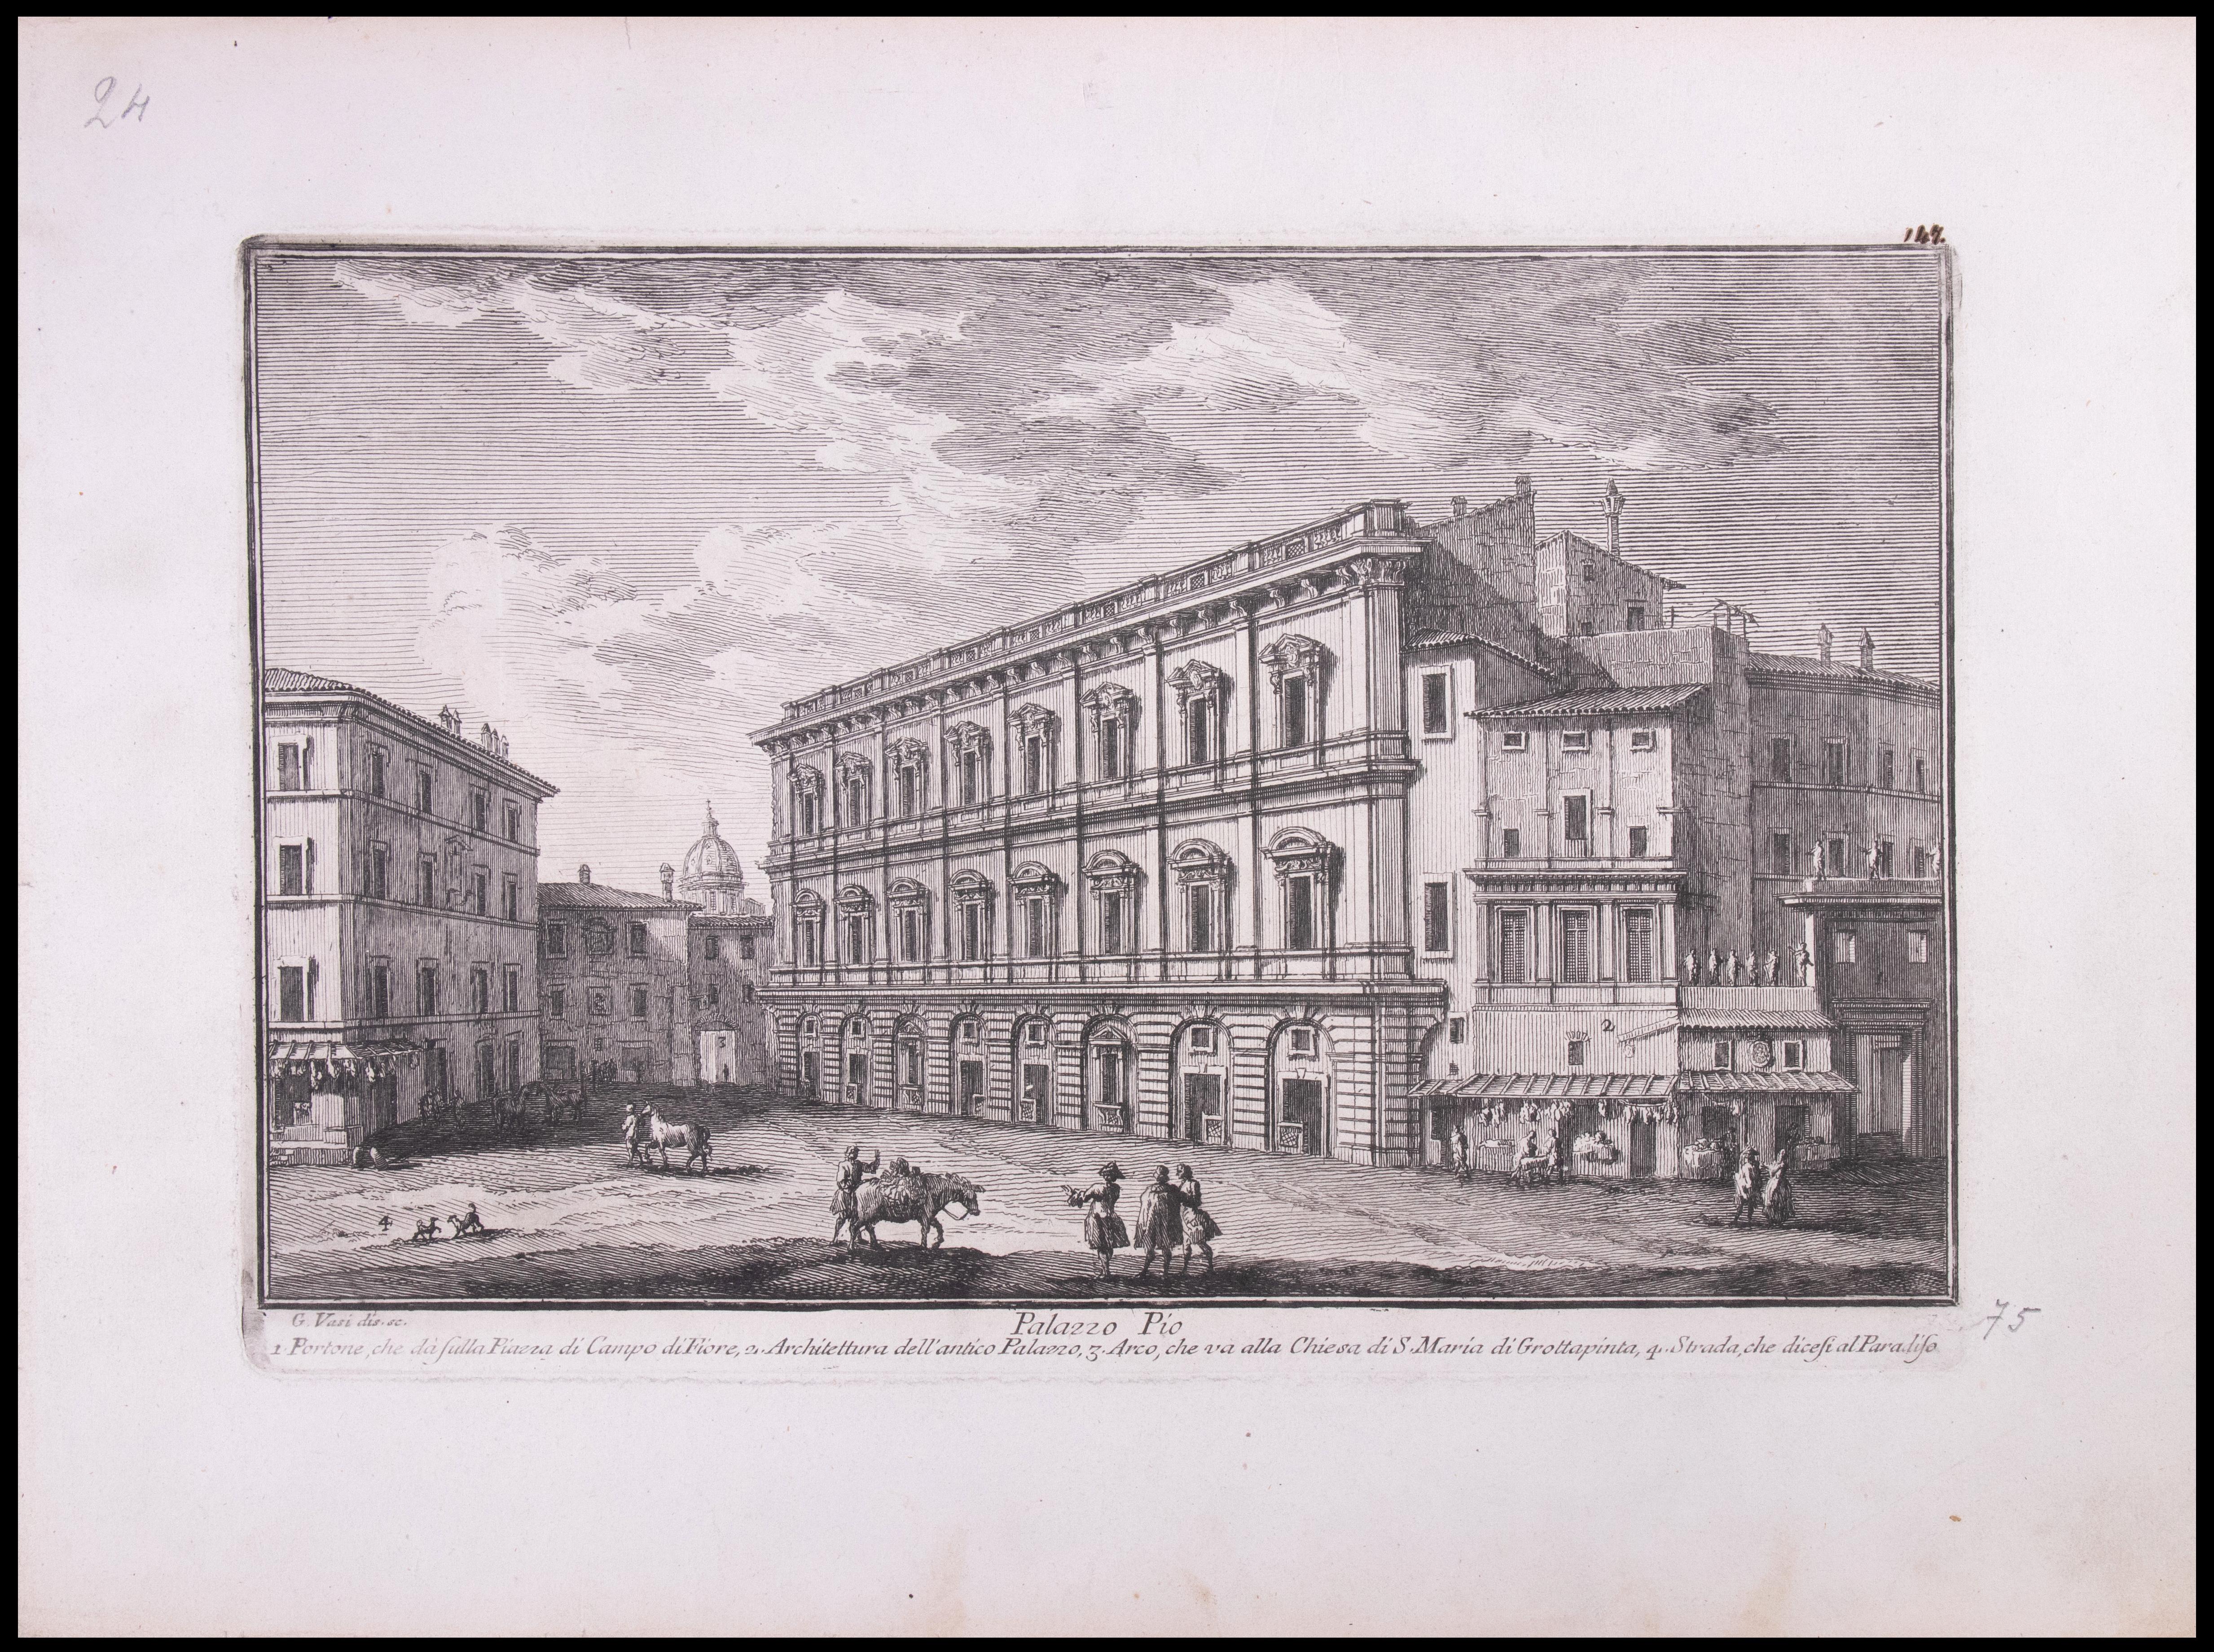 Palazzo Pio is an etching of the Late 18th century realized by Giuseppe Vasi.

Signed and titled on plate lower margin. 

Good conditions except for consumed margins with some foxings.

Giuseppe Vasi  (Corleone,1710 - Rome, 1782) was an engraver,